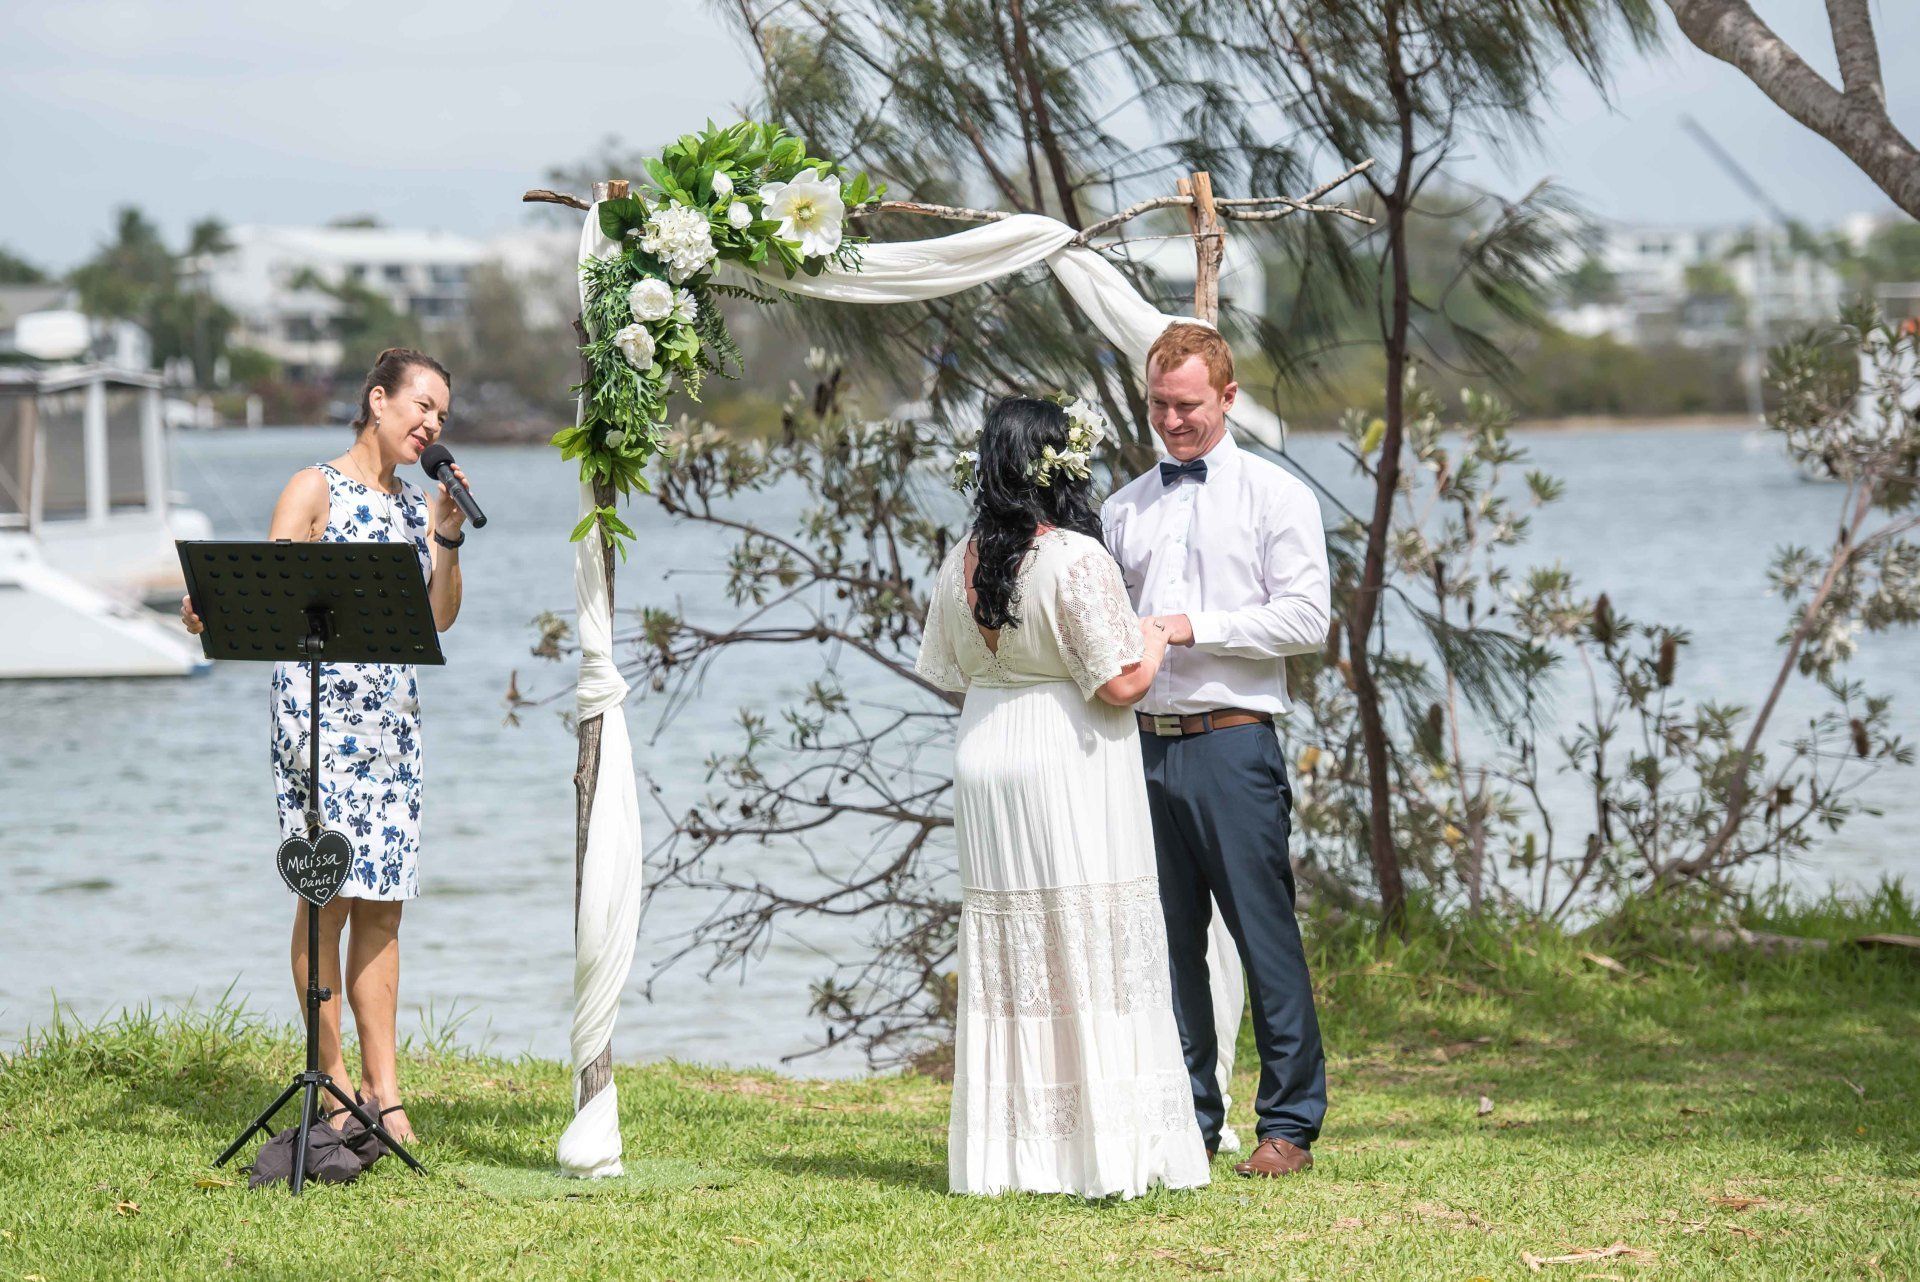 smiling Noosa celebrant marrying couple by the Noosa river, boats in background on the water